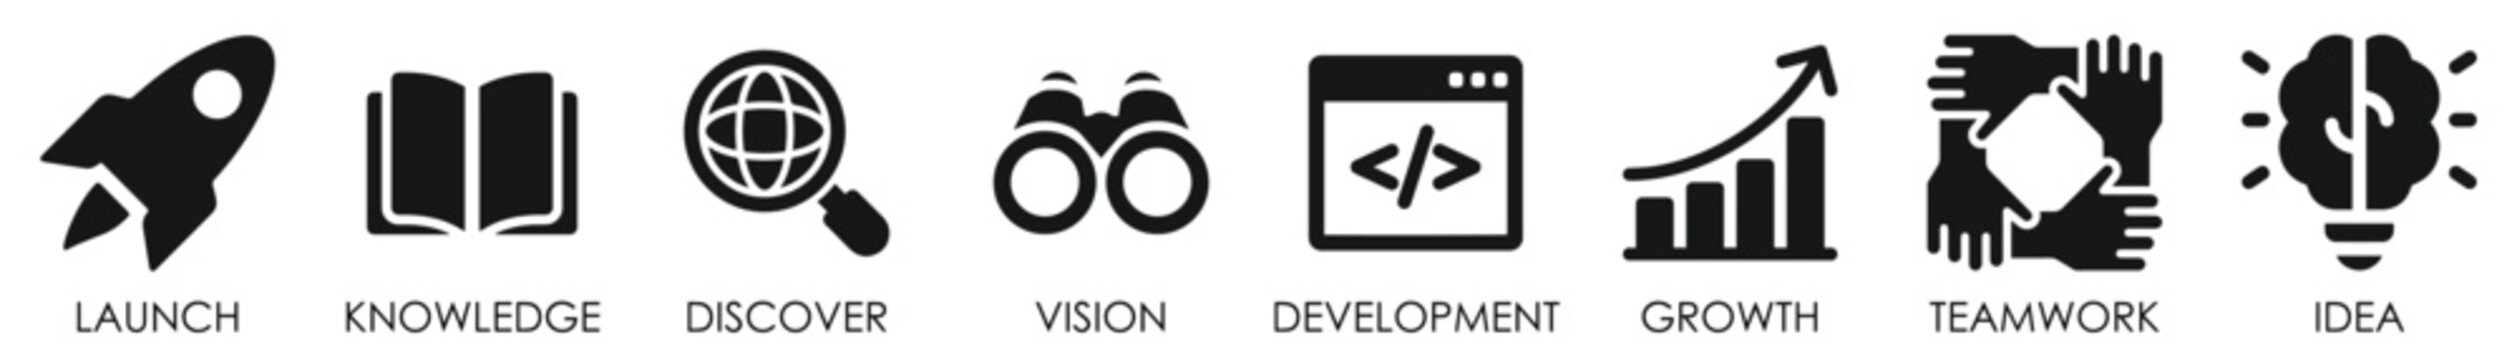 Startup abstract icons set. Starting business symbols flat 8 icons collection. Launch, development, growth, idea